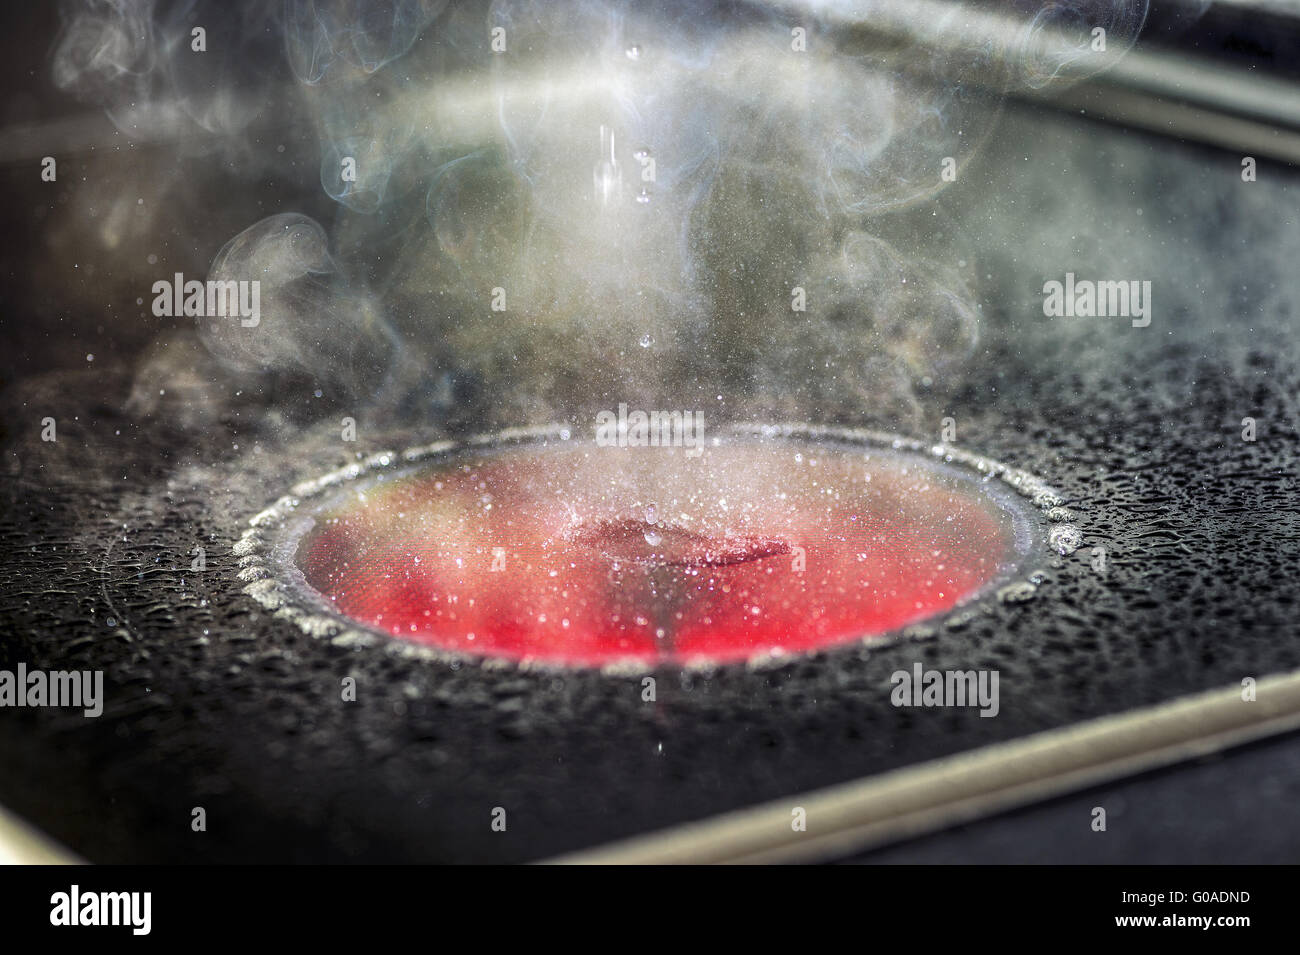 Water droplets evaporate euf a red-hot stove Stock Photo